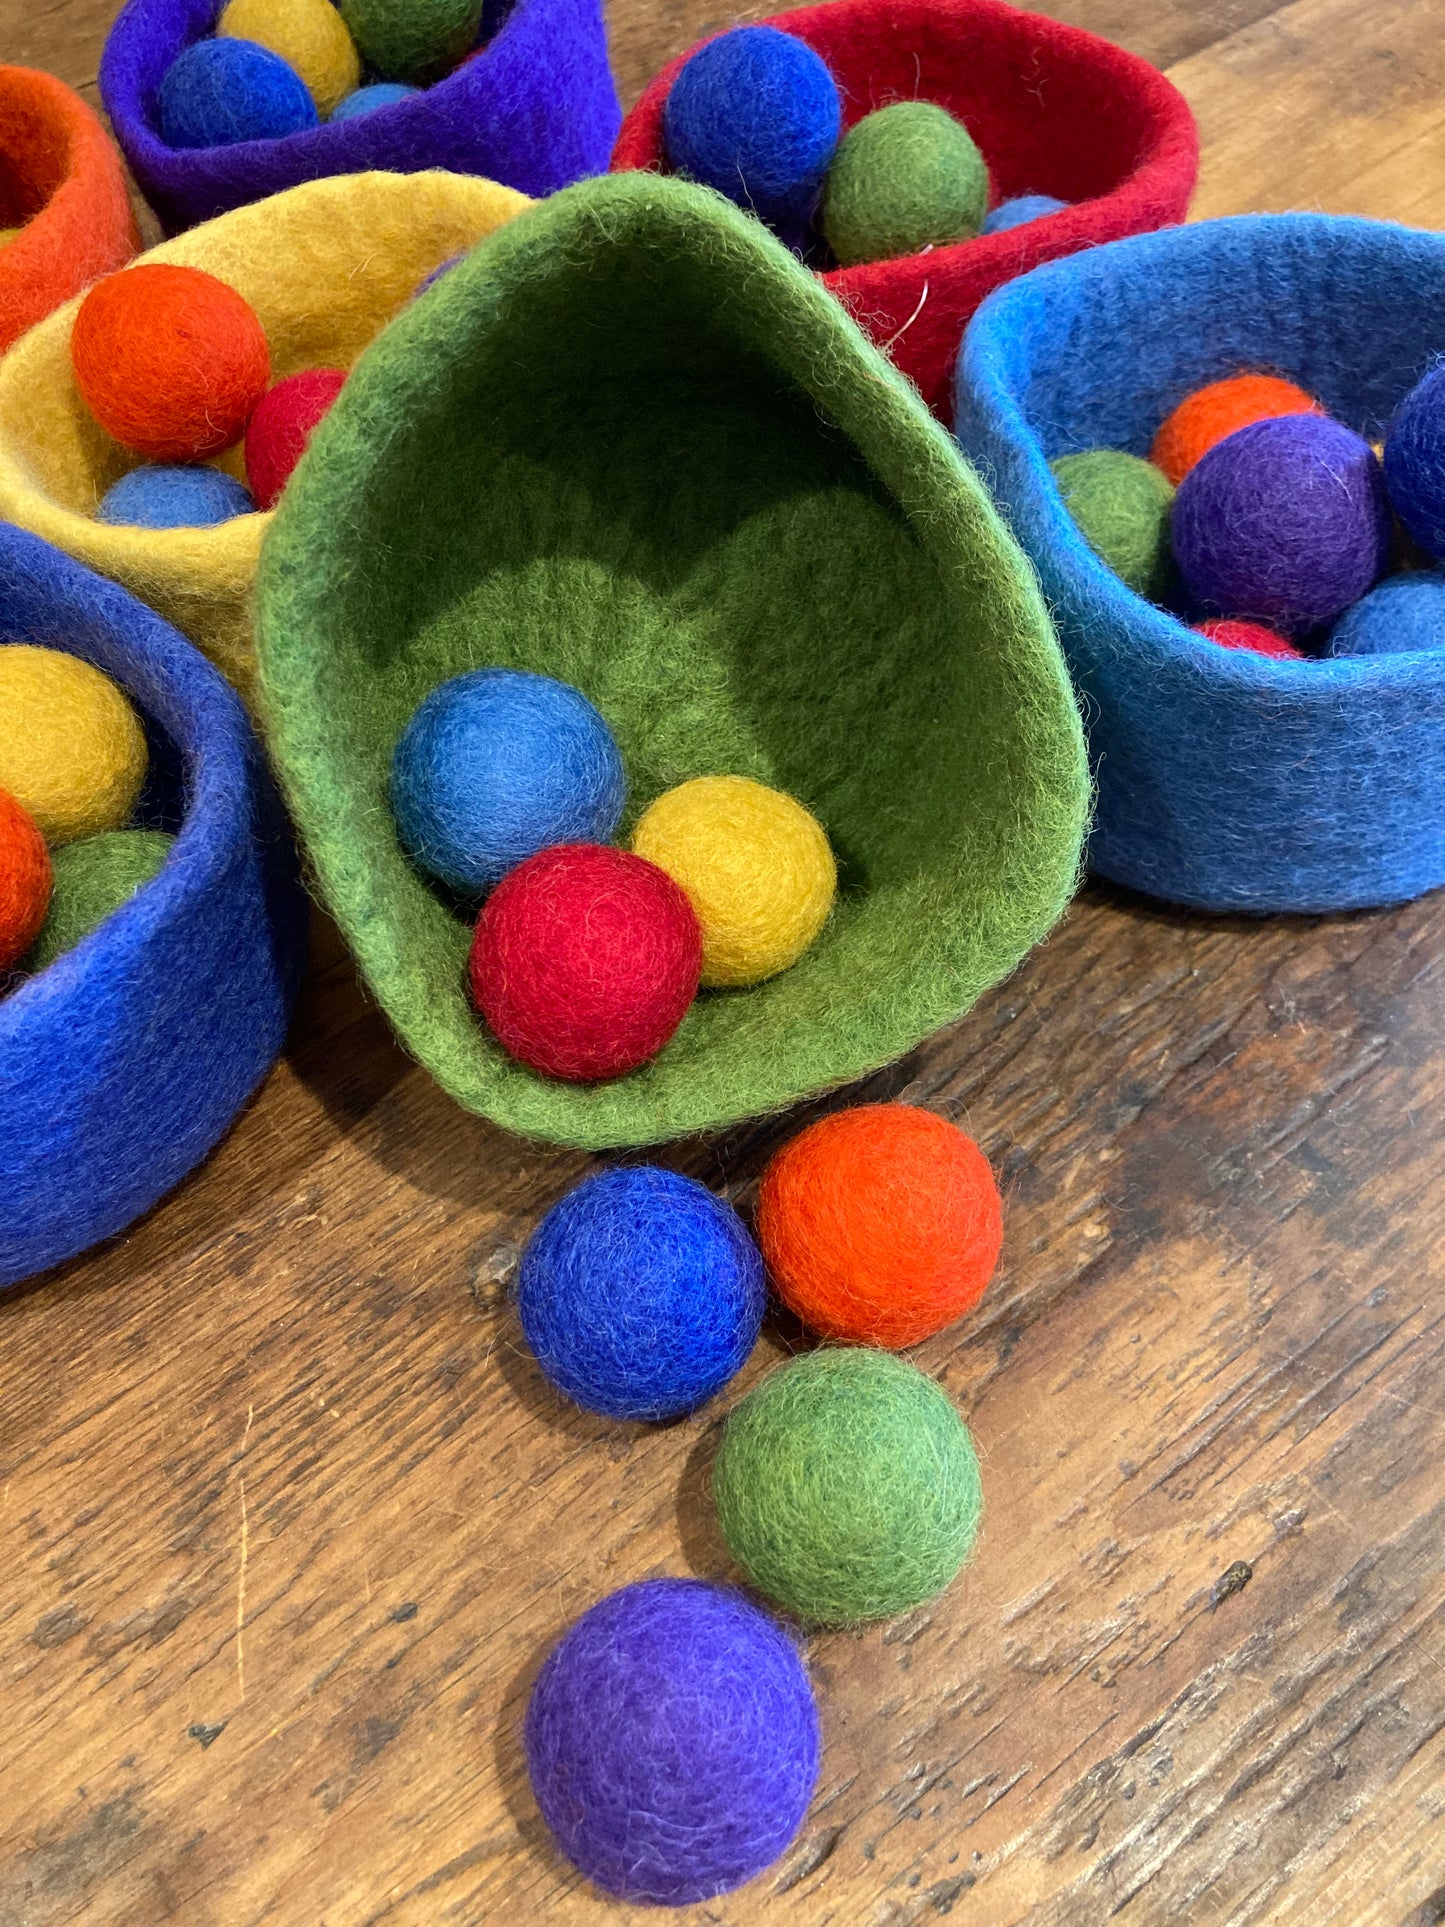 Felted Toys for Baby and Dollhouse Play Set - COLOURED FELT BOWL WITH 7 FELTED BALLS